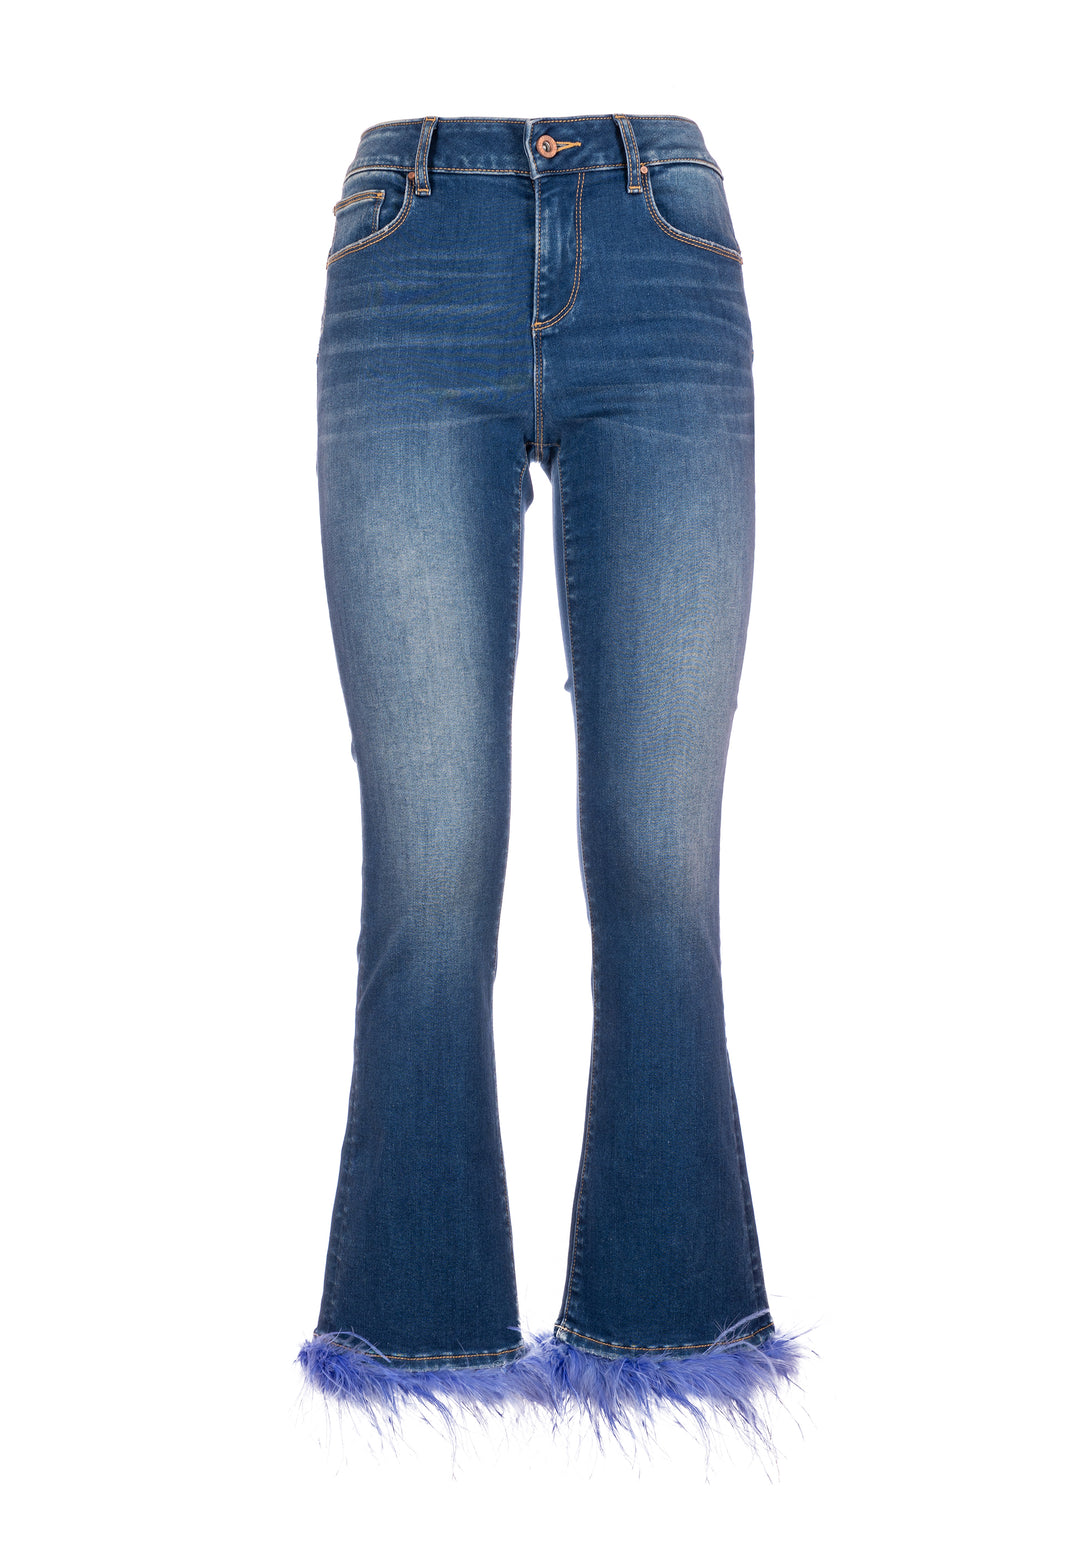 Jeans cropped with push up effect made in denim with middle wash